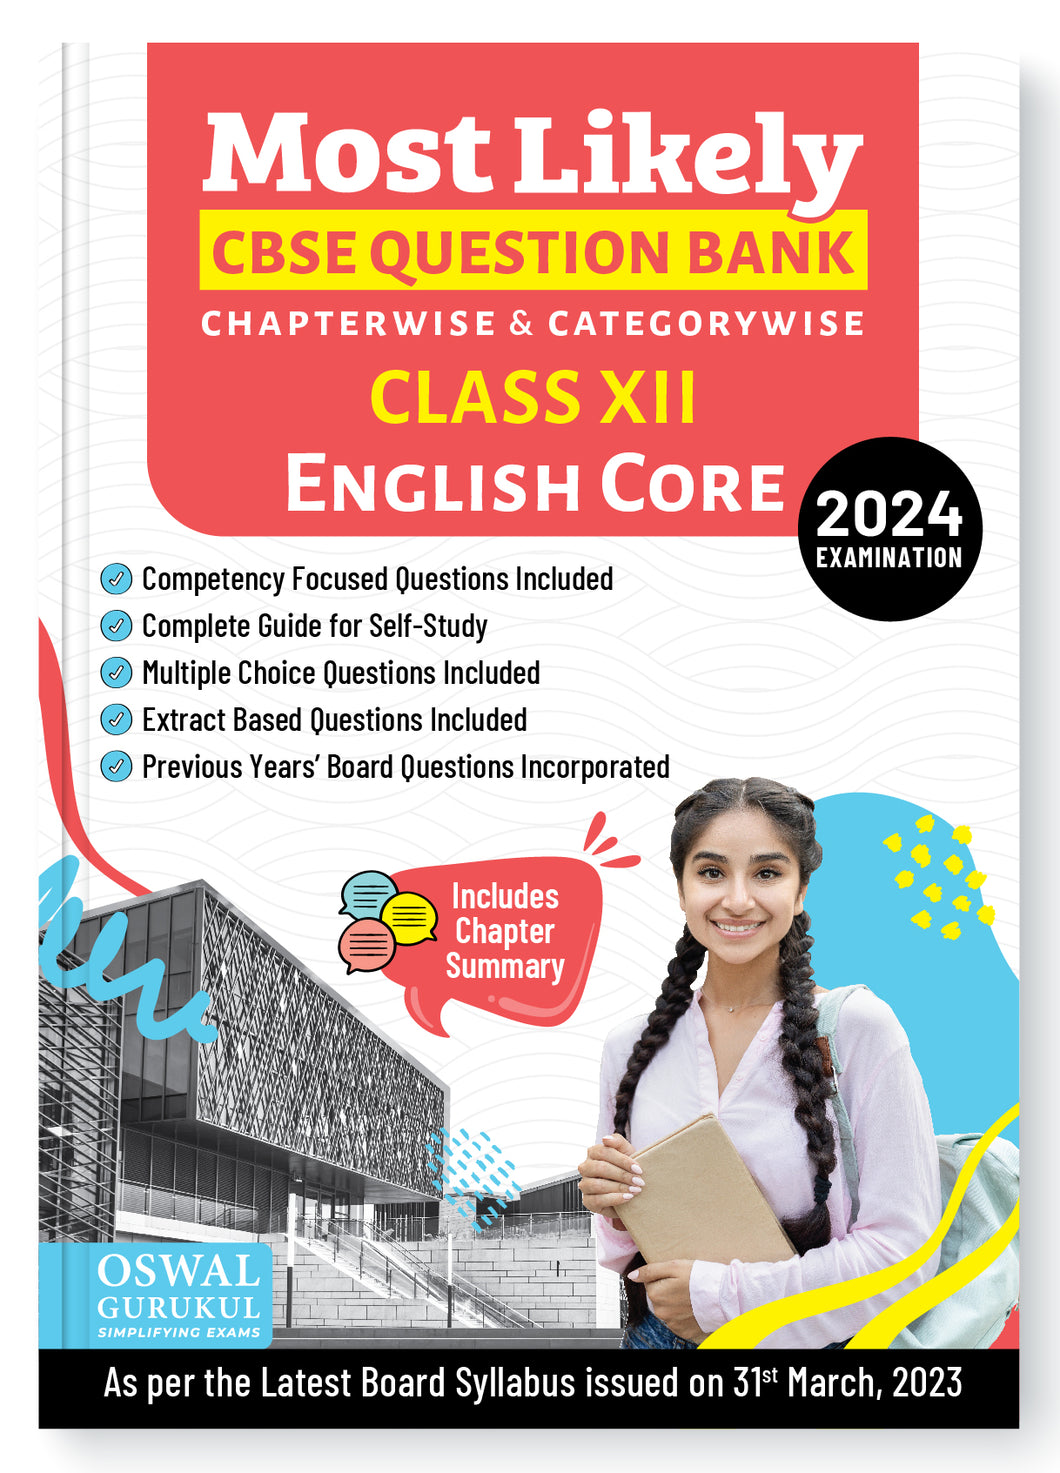 Oswal - Gurukul English Core Most Likely Question Bank : CBSE Class 12 for 2024 Exam